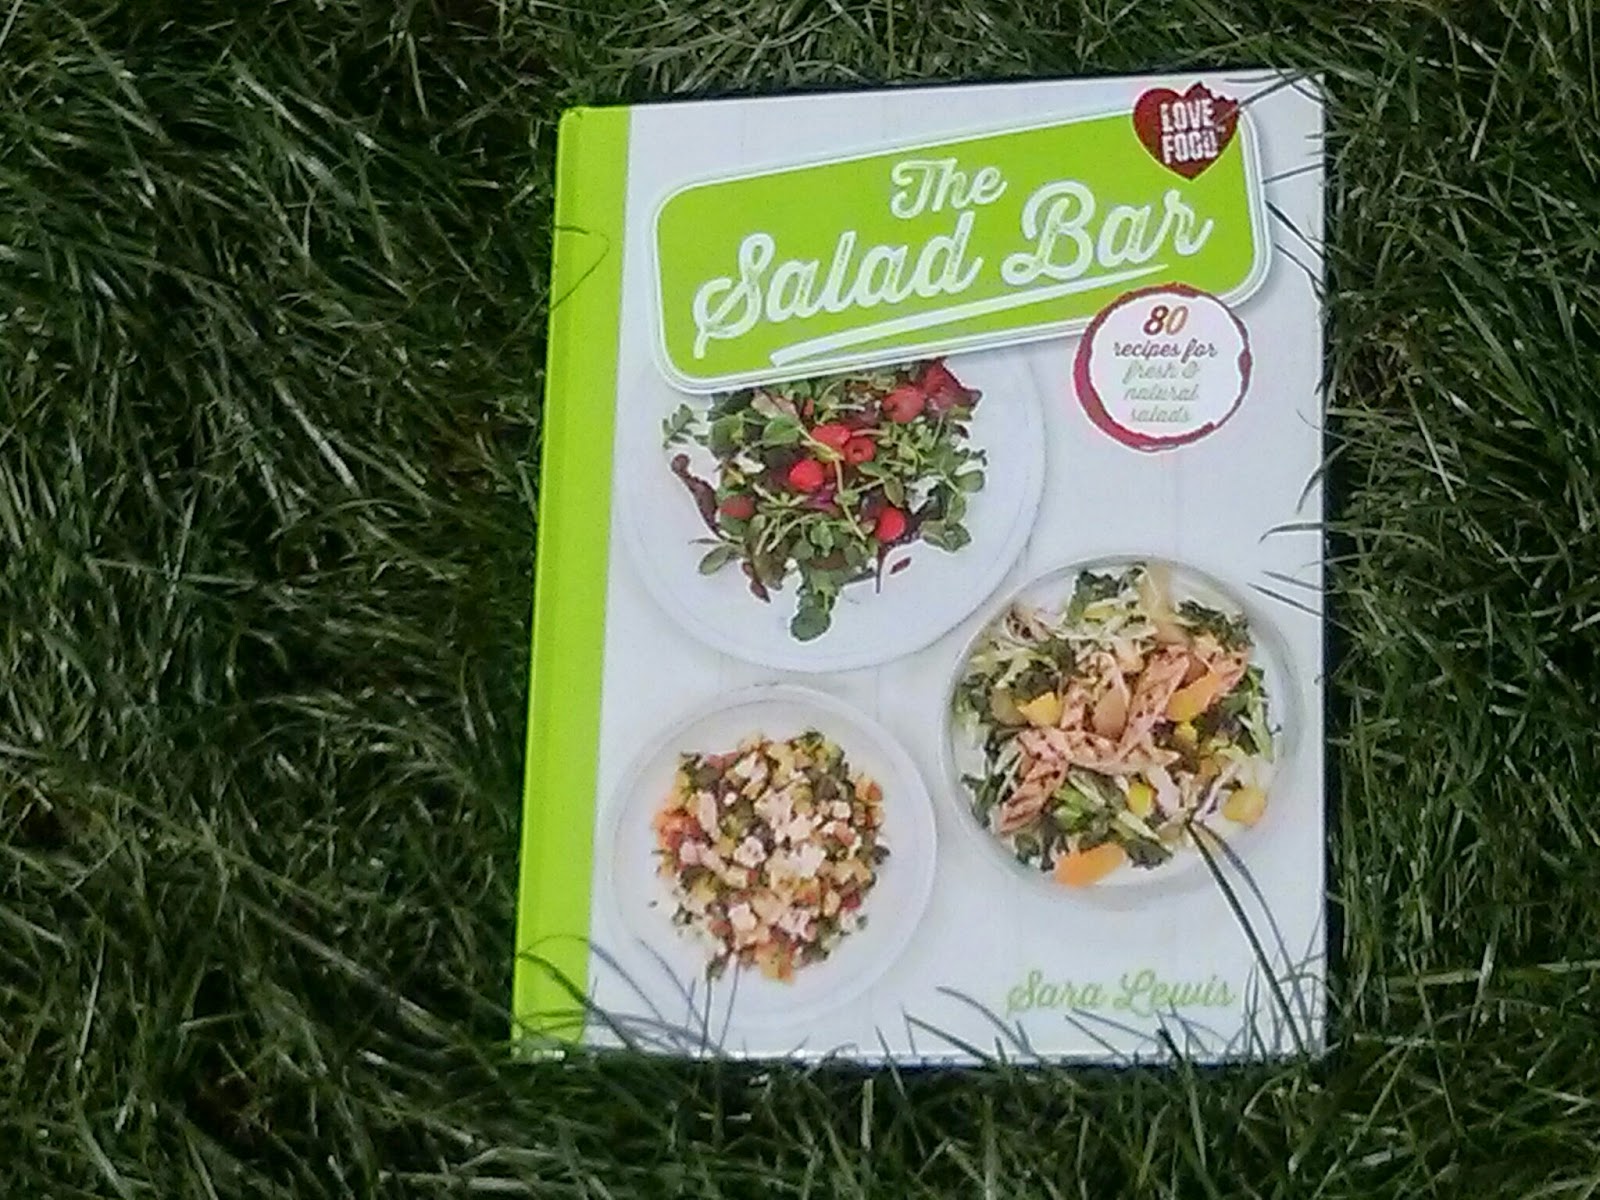 The Salad Bar Book (on my lovely green lawn)